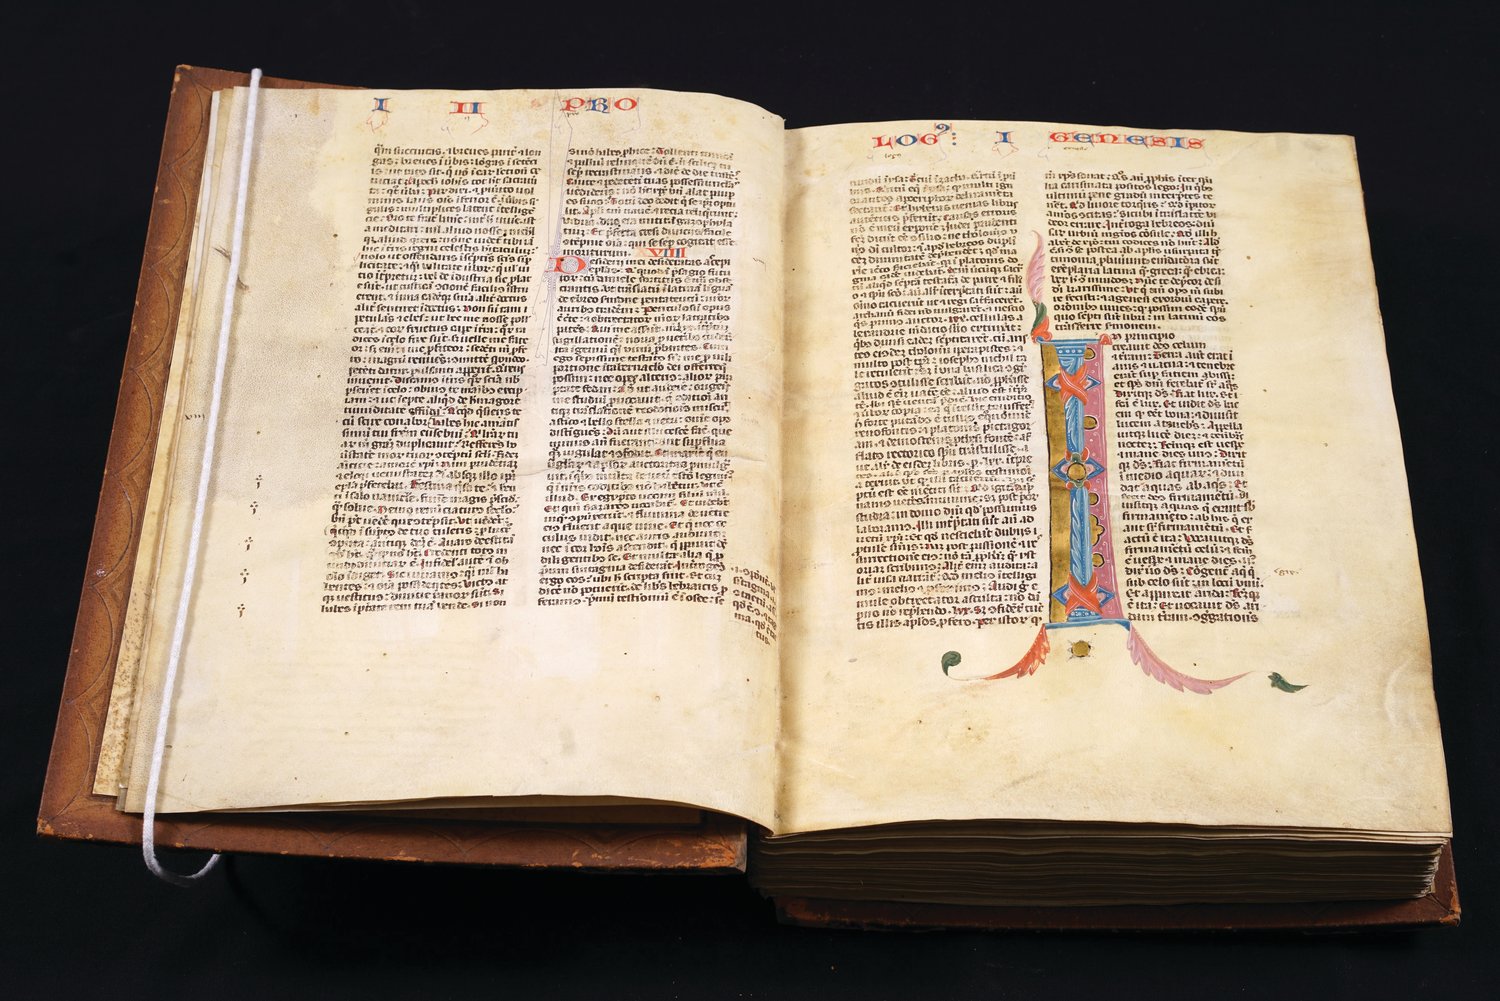 Rare Bible on display at Indiana State Library